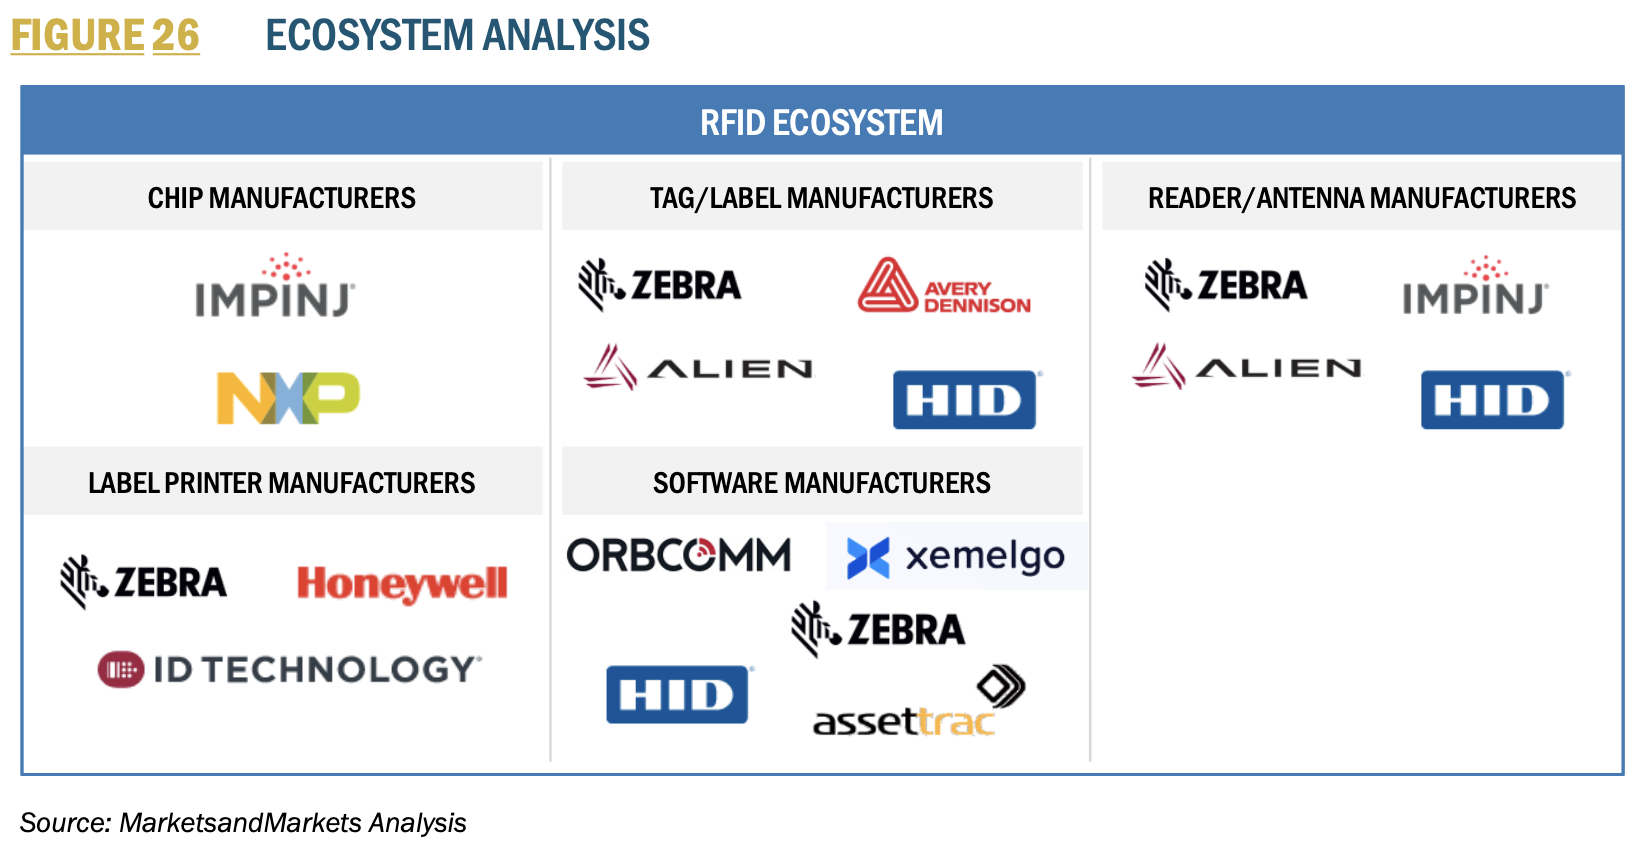 RFID Ecosystem Analysis from Markets and Markets 2023